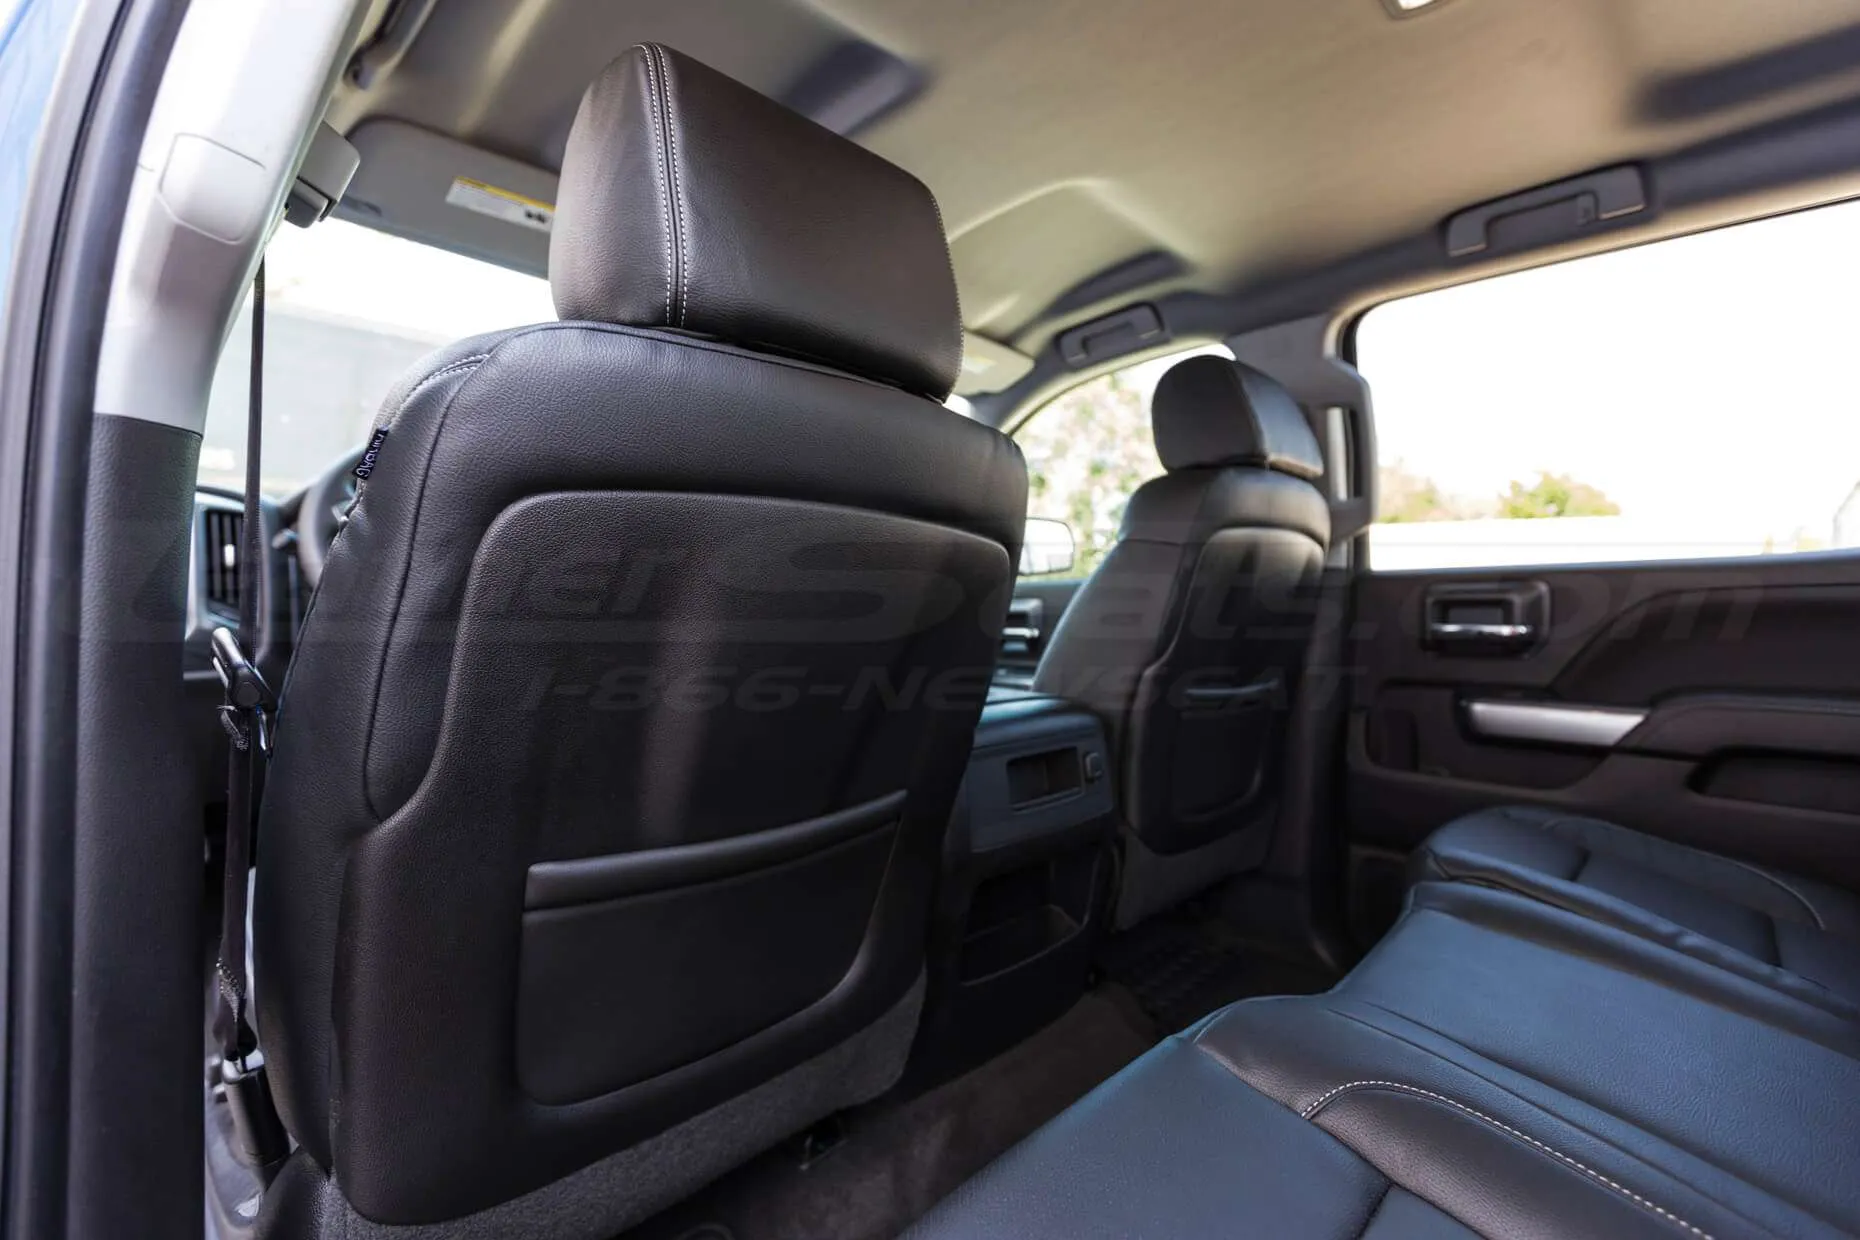 2014-2018 Chevrolet Silverado LeatherSeat Kit - Black - Installed - Back of front seat